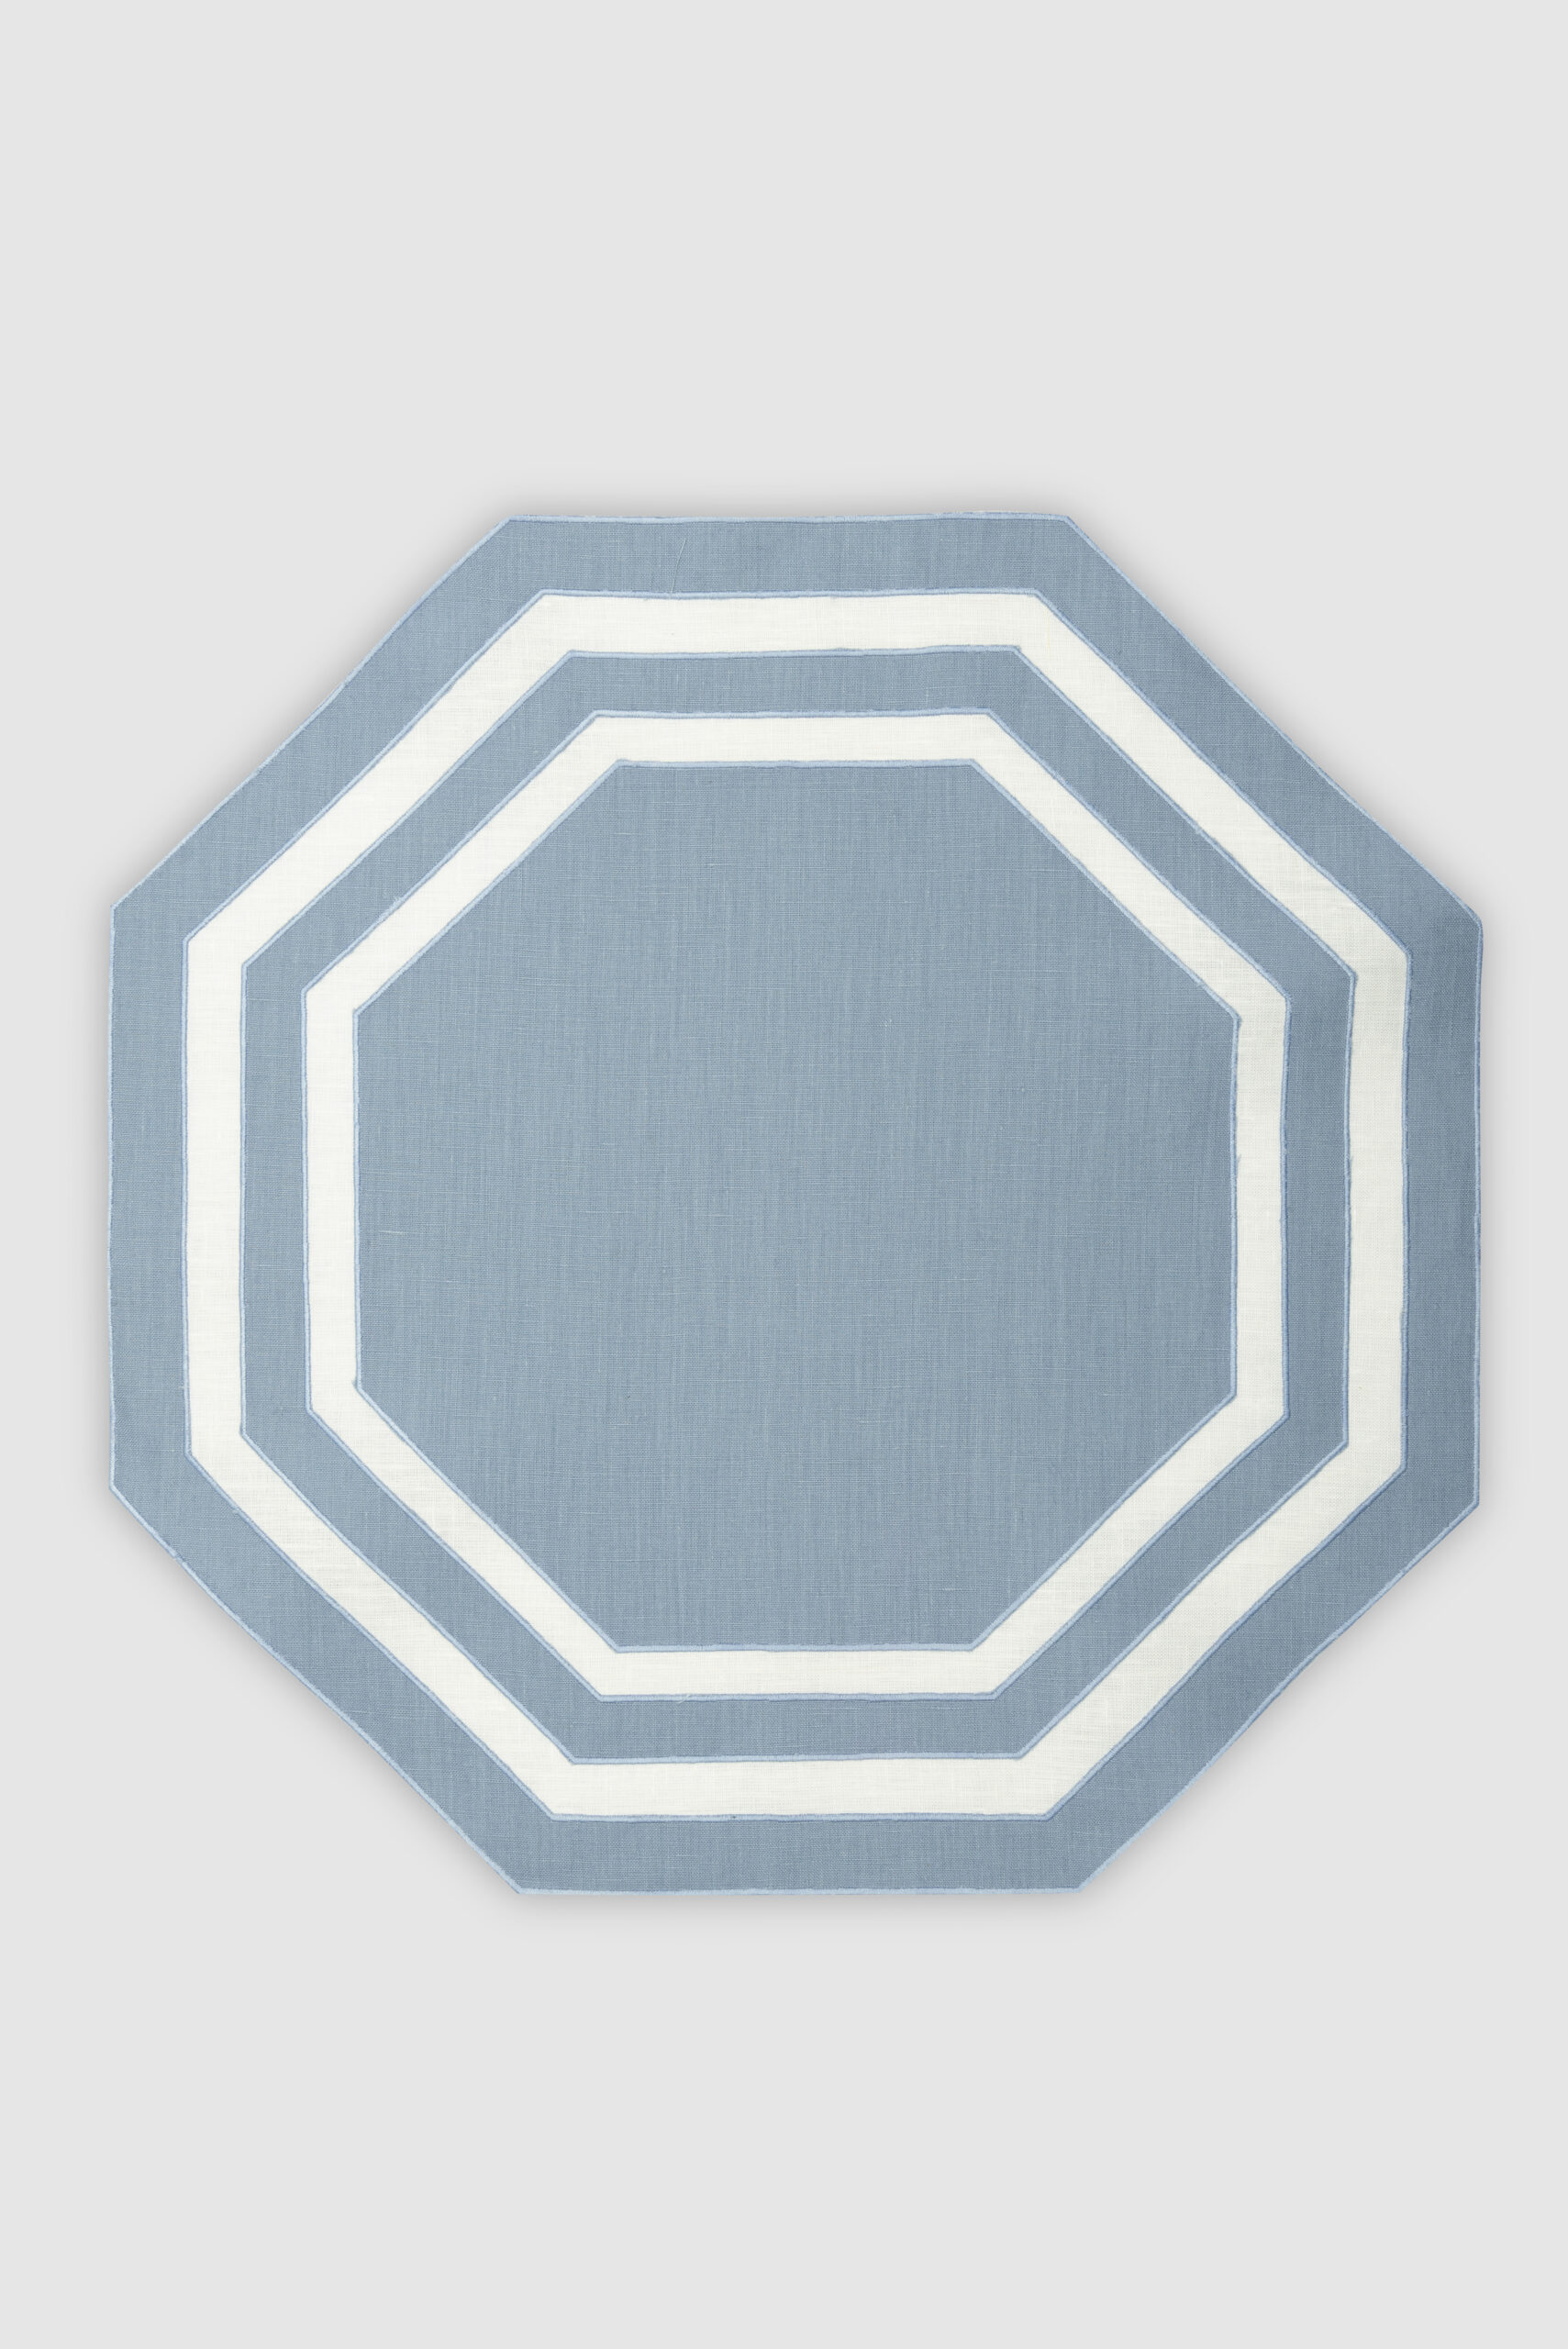 octo slate blue placemat